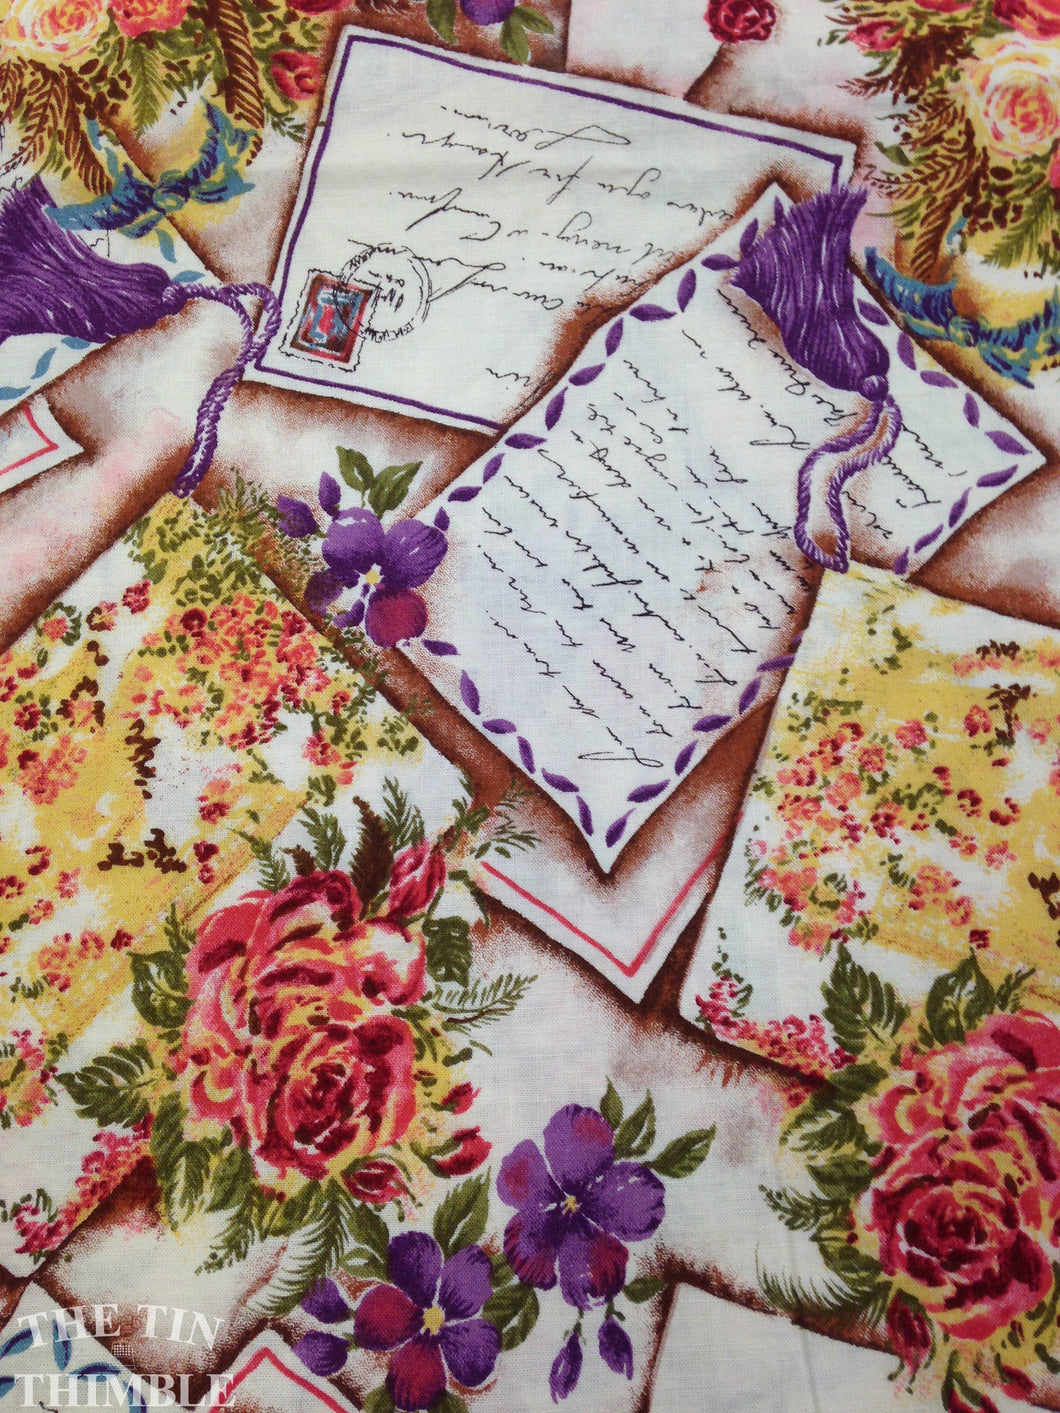 Romantic Cotton Floral Written Letter-Post Card Fabric By Alexander Henry Collection -1 Yard /  Quilting Fabric / Quilting Cotton / Flowers